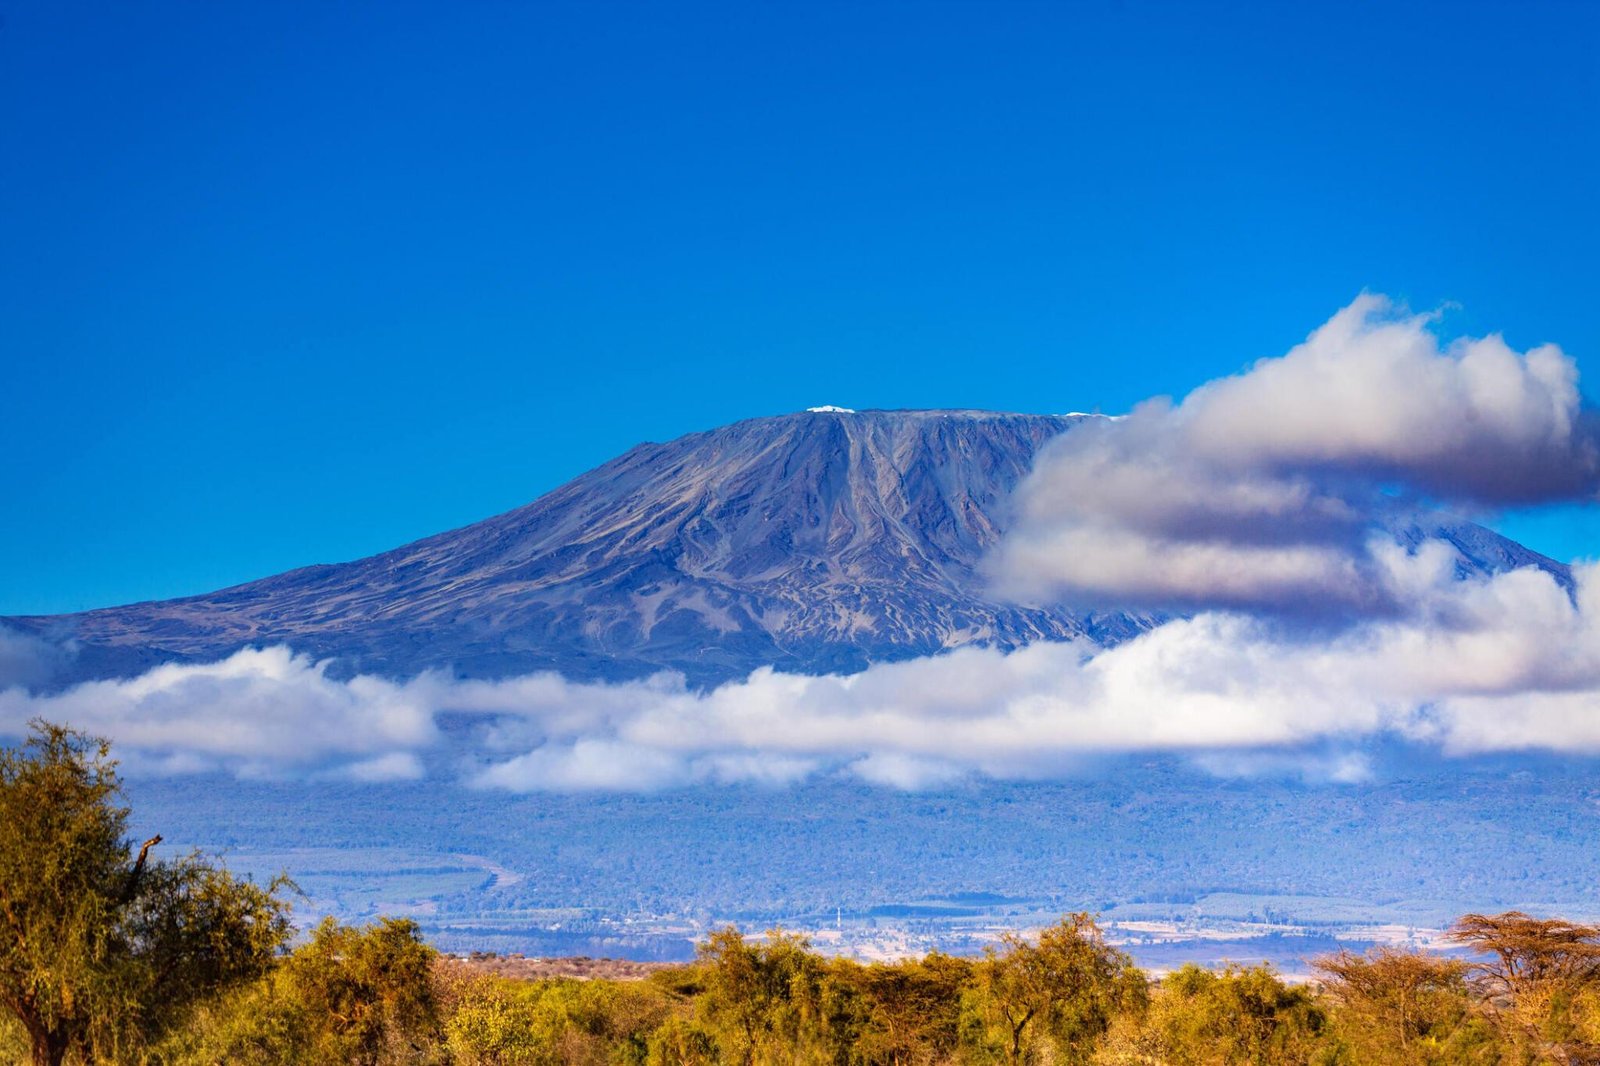 The Best Ultimate Hike Mount Kilimanjaro and Meru with Tanzania’s